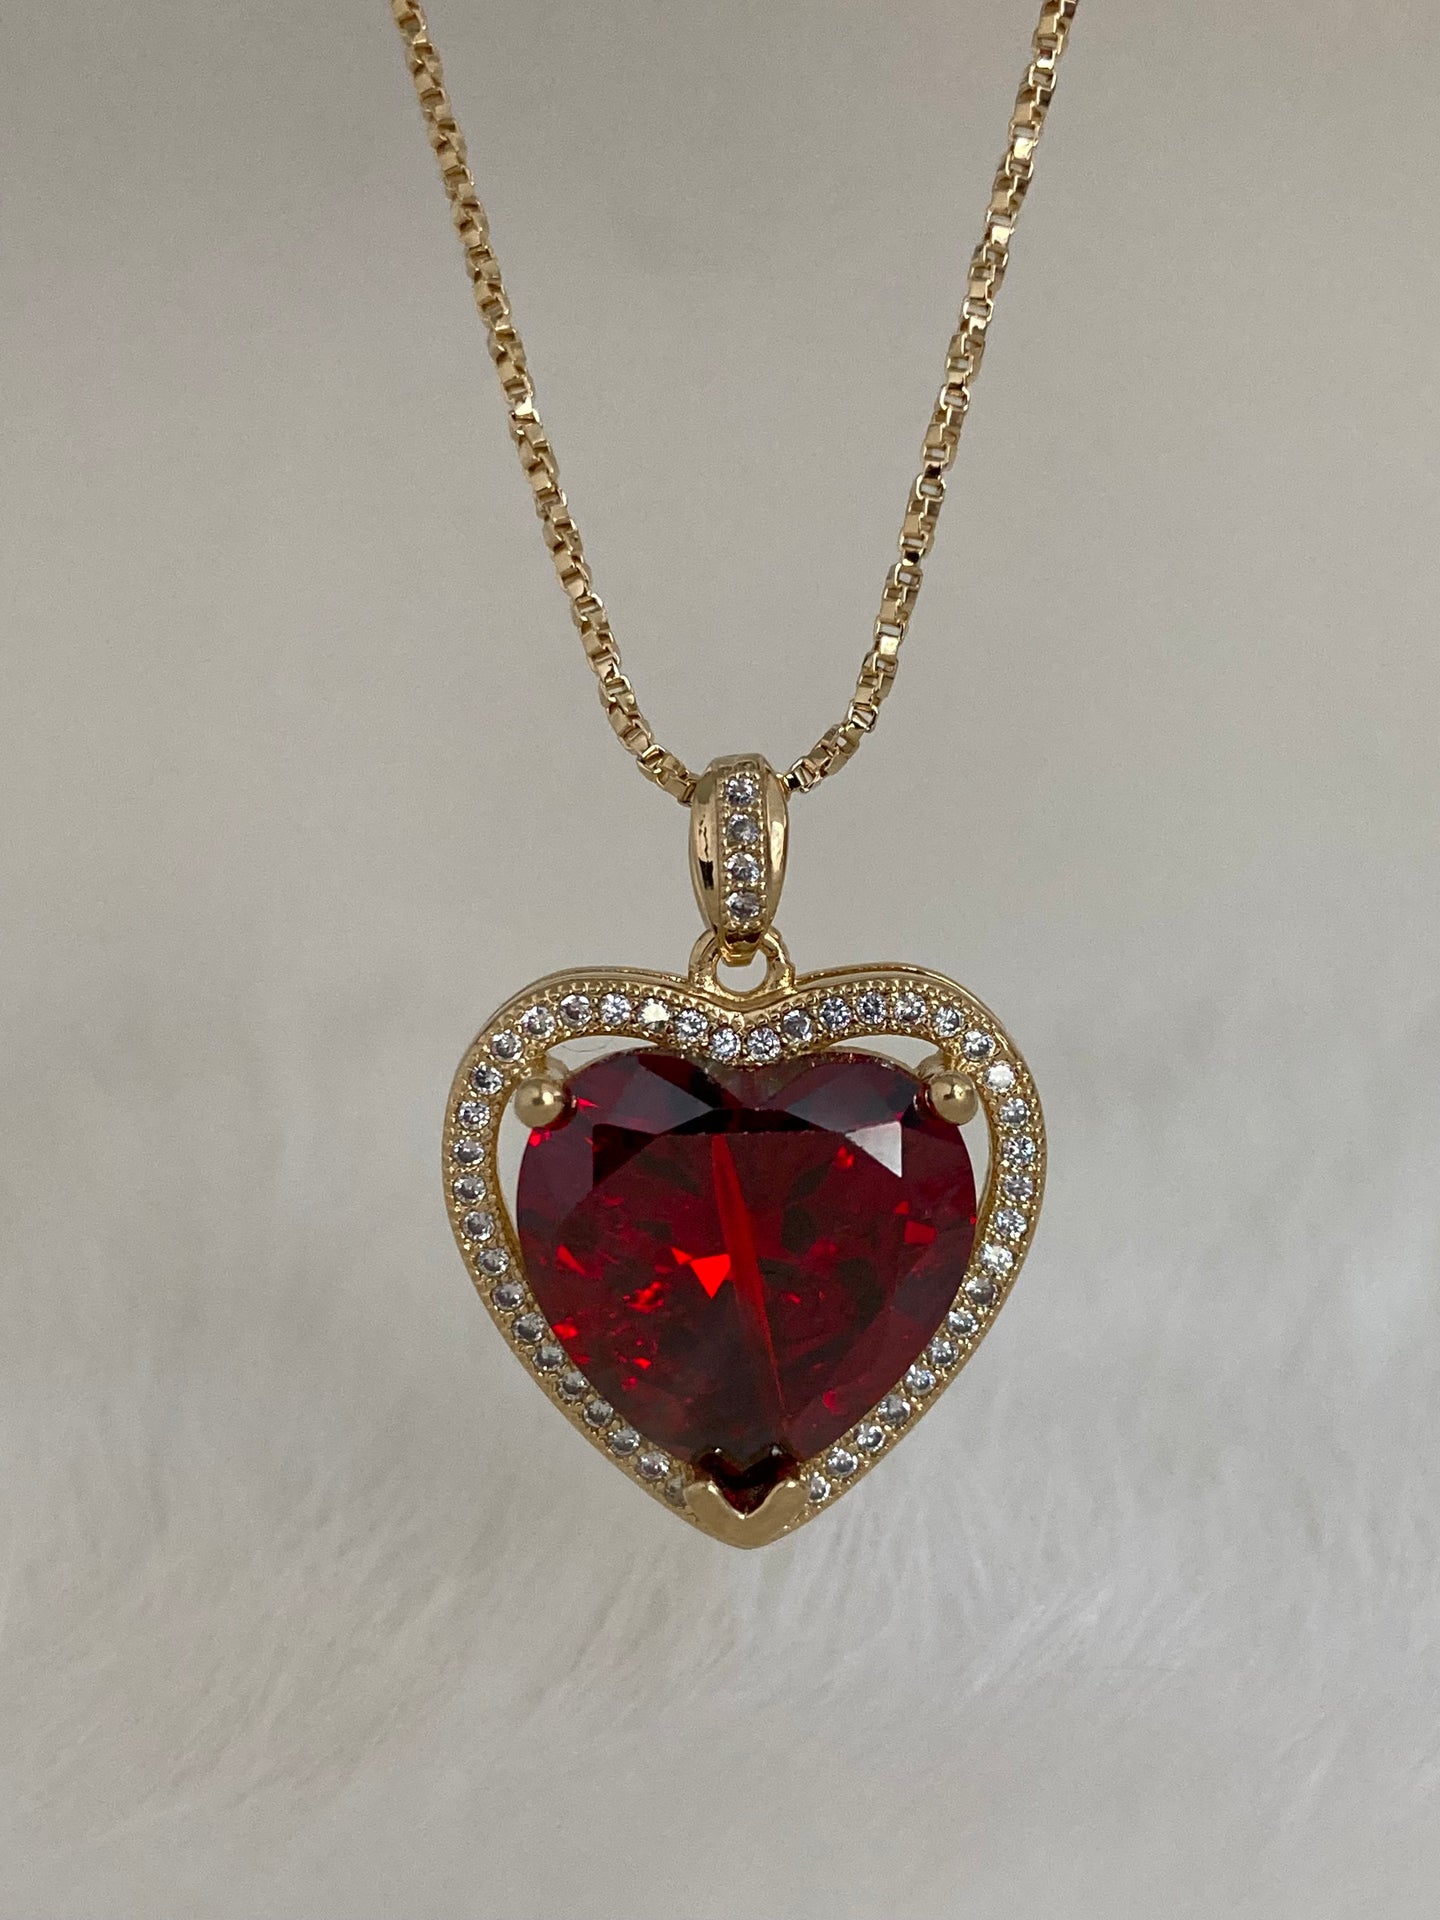 Heart Shaped Garnet Solitaire Necklace, 3 carats 10*10mm Deep Red Heart Cut Garnet  Pendant, January Birthstone Gift, Valentines Gift For Her